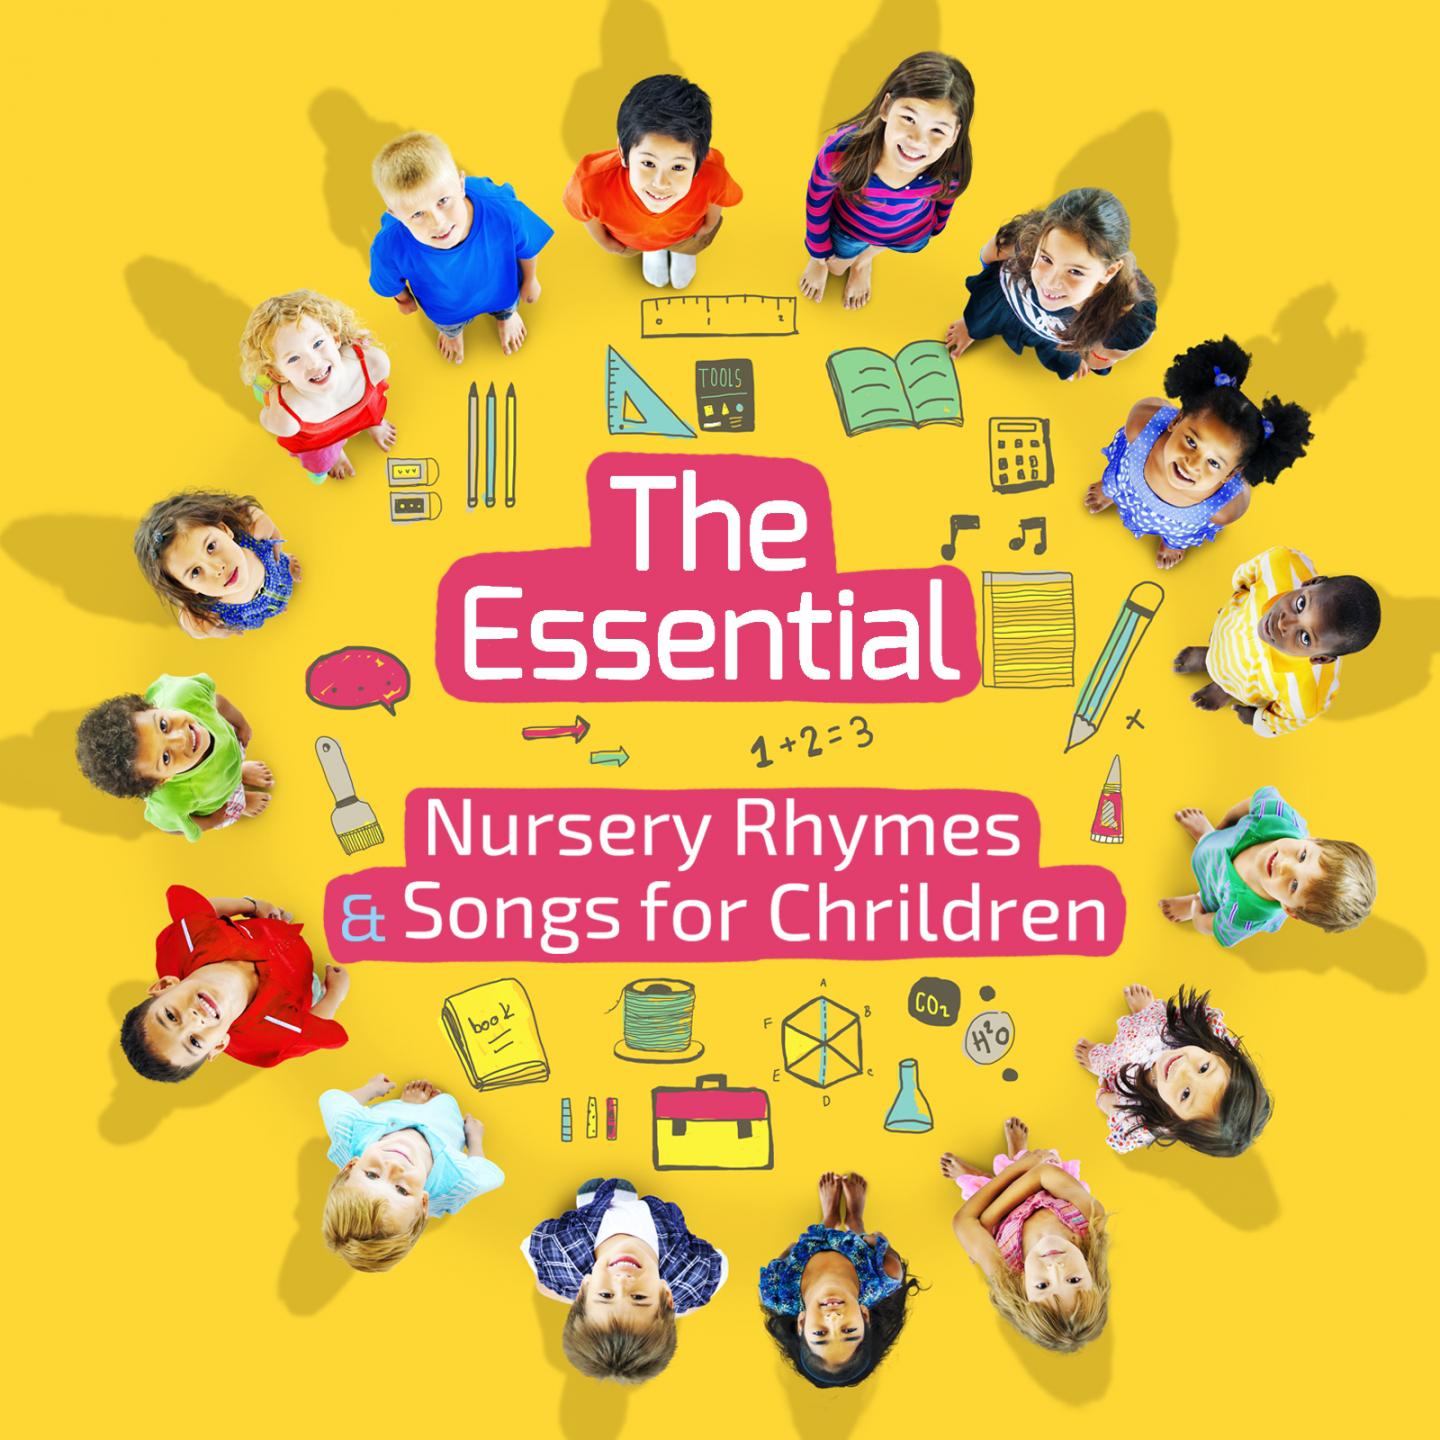 The Essential Nursery Rhymes & Songs For Children